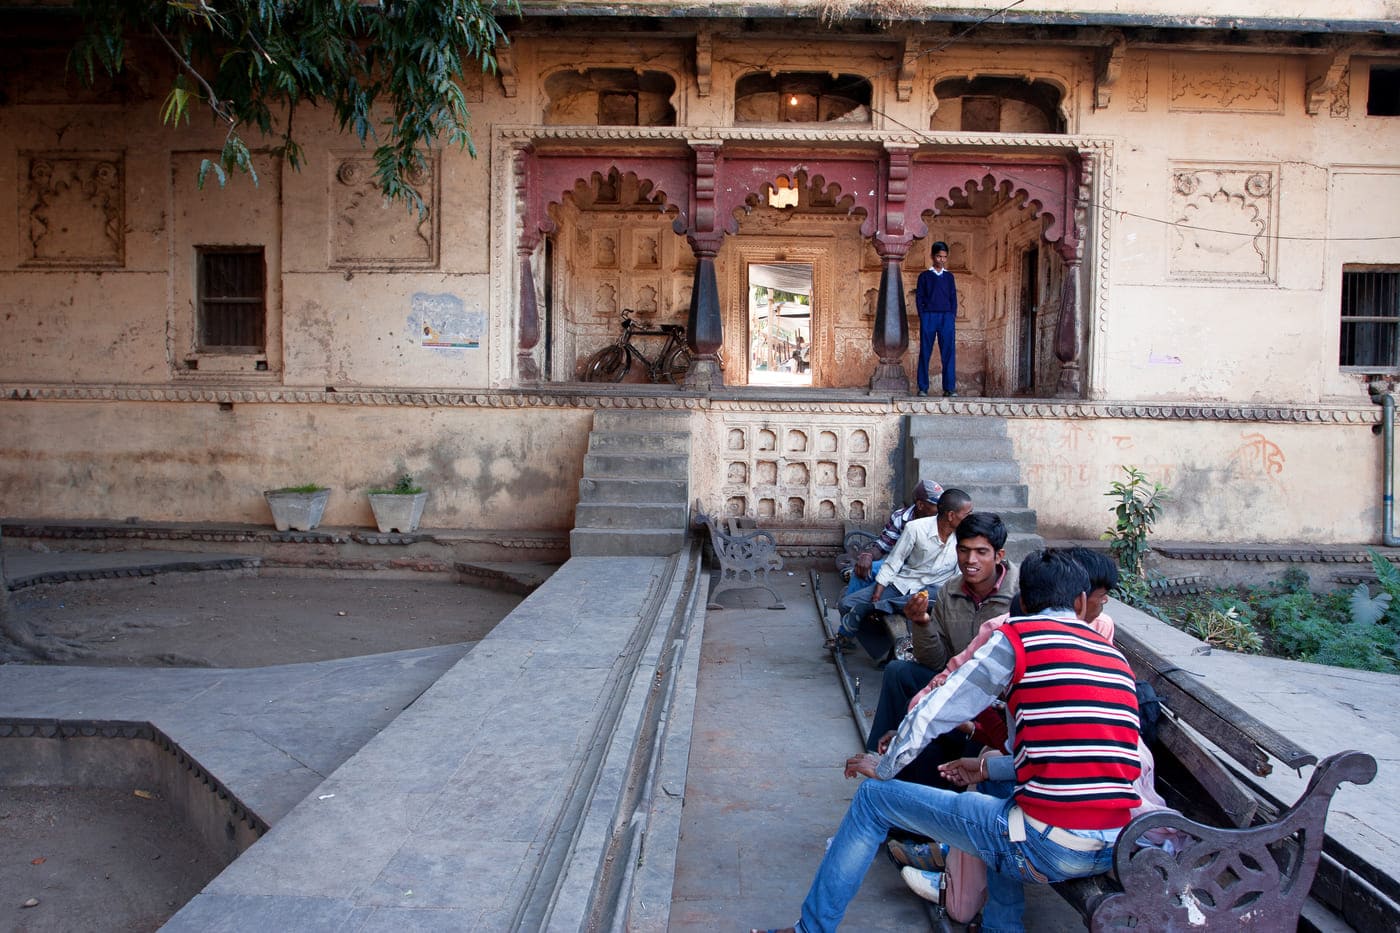 A group of Indian teenagers meet up in the old city garden in Orchha, Madhya Pradesh, India. The place attracts both locals and tourists alike because of its unique architeture 